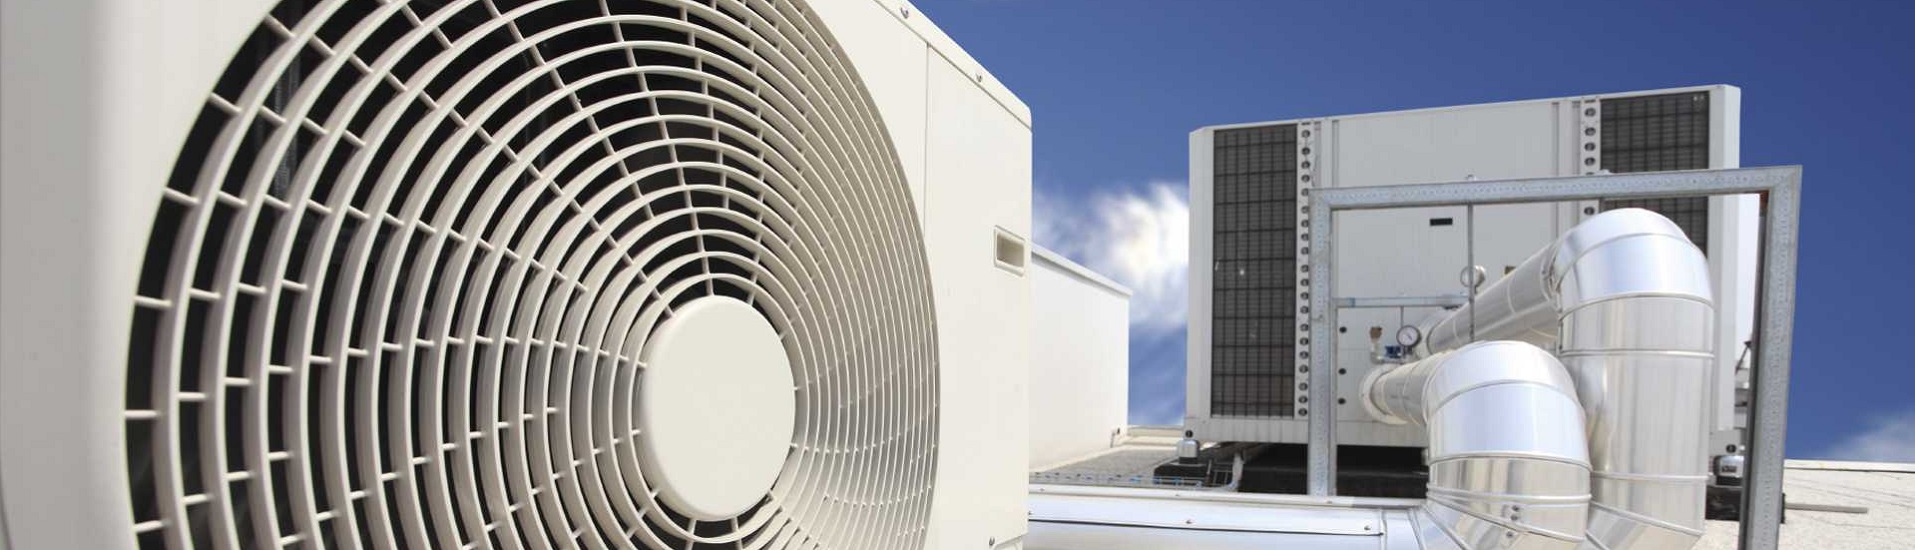 providing top quality Air conditioning services throughout Wickford, Essex